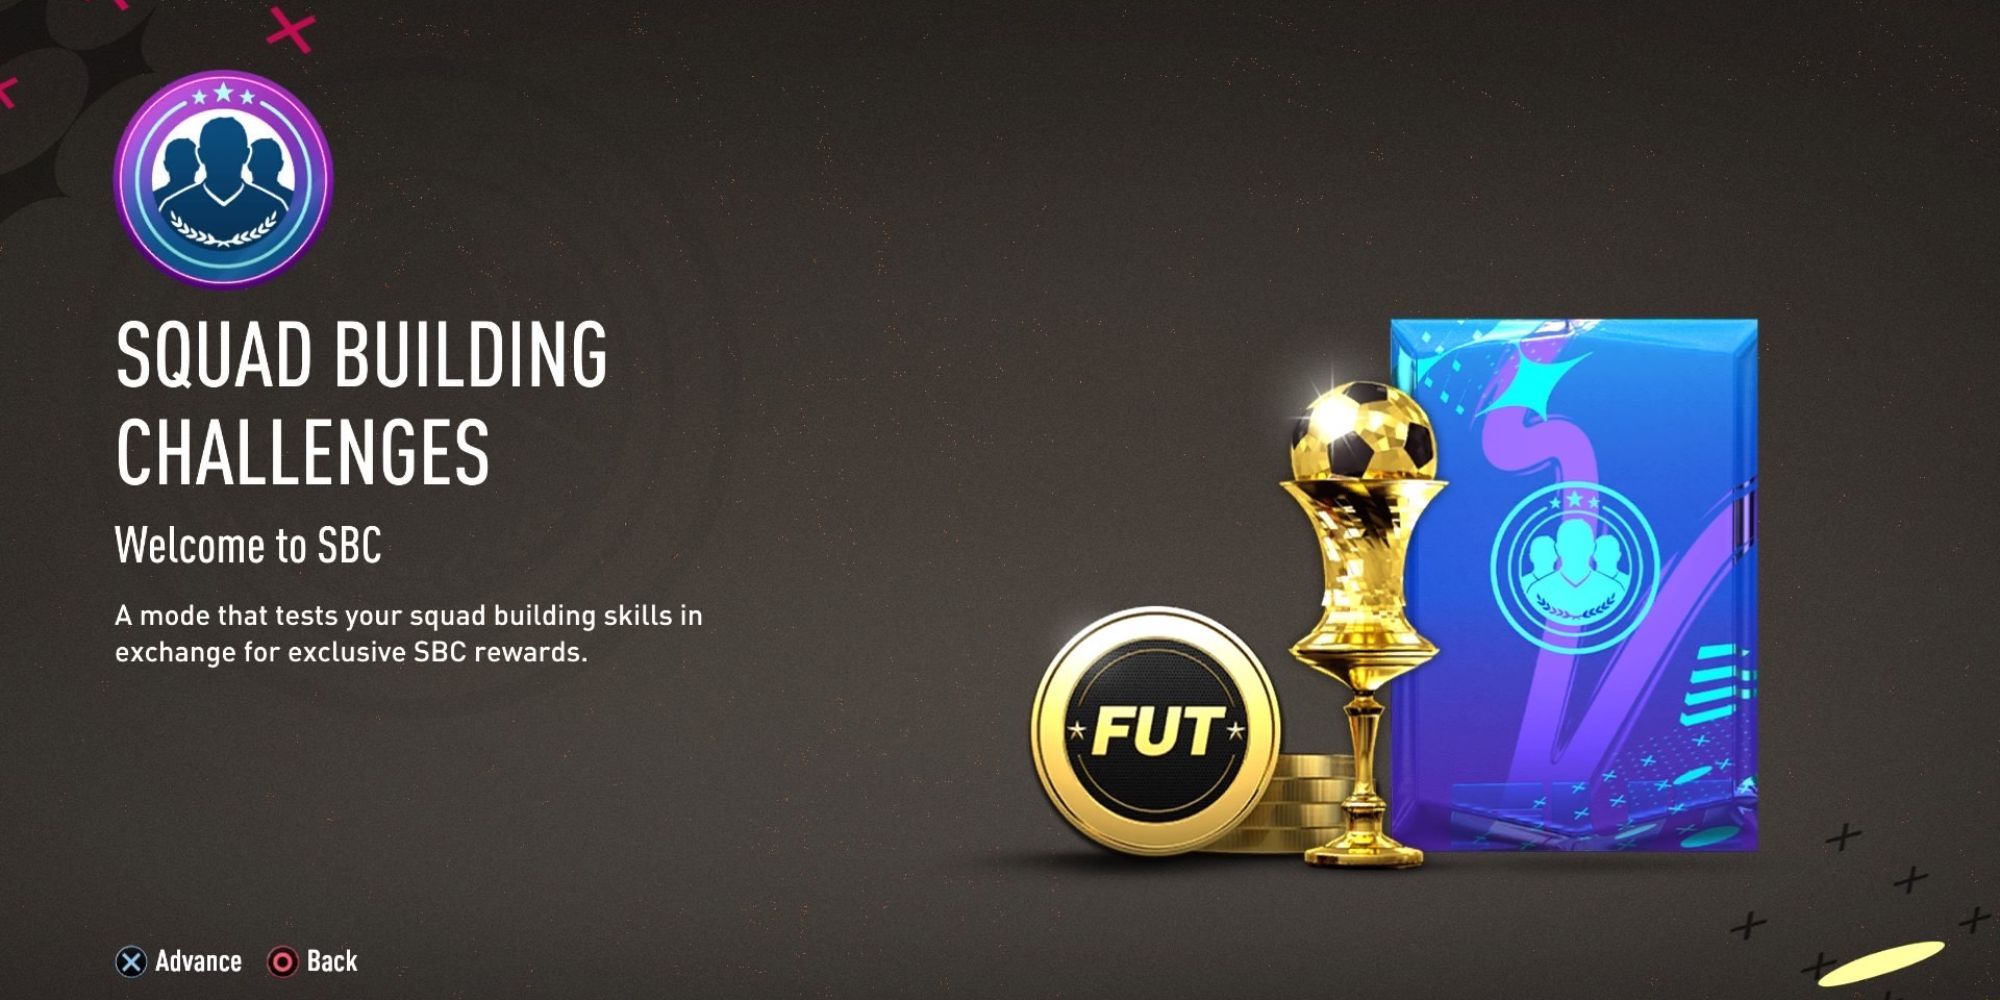 The Squad Building Challenges welcome screen on FIFA 23